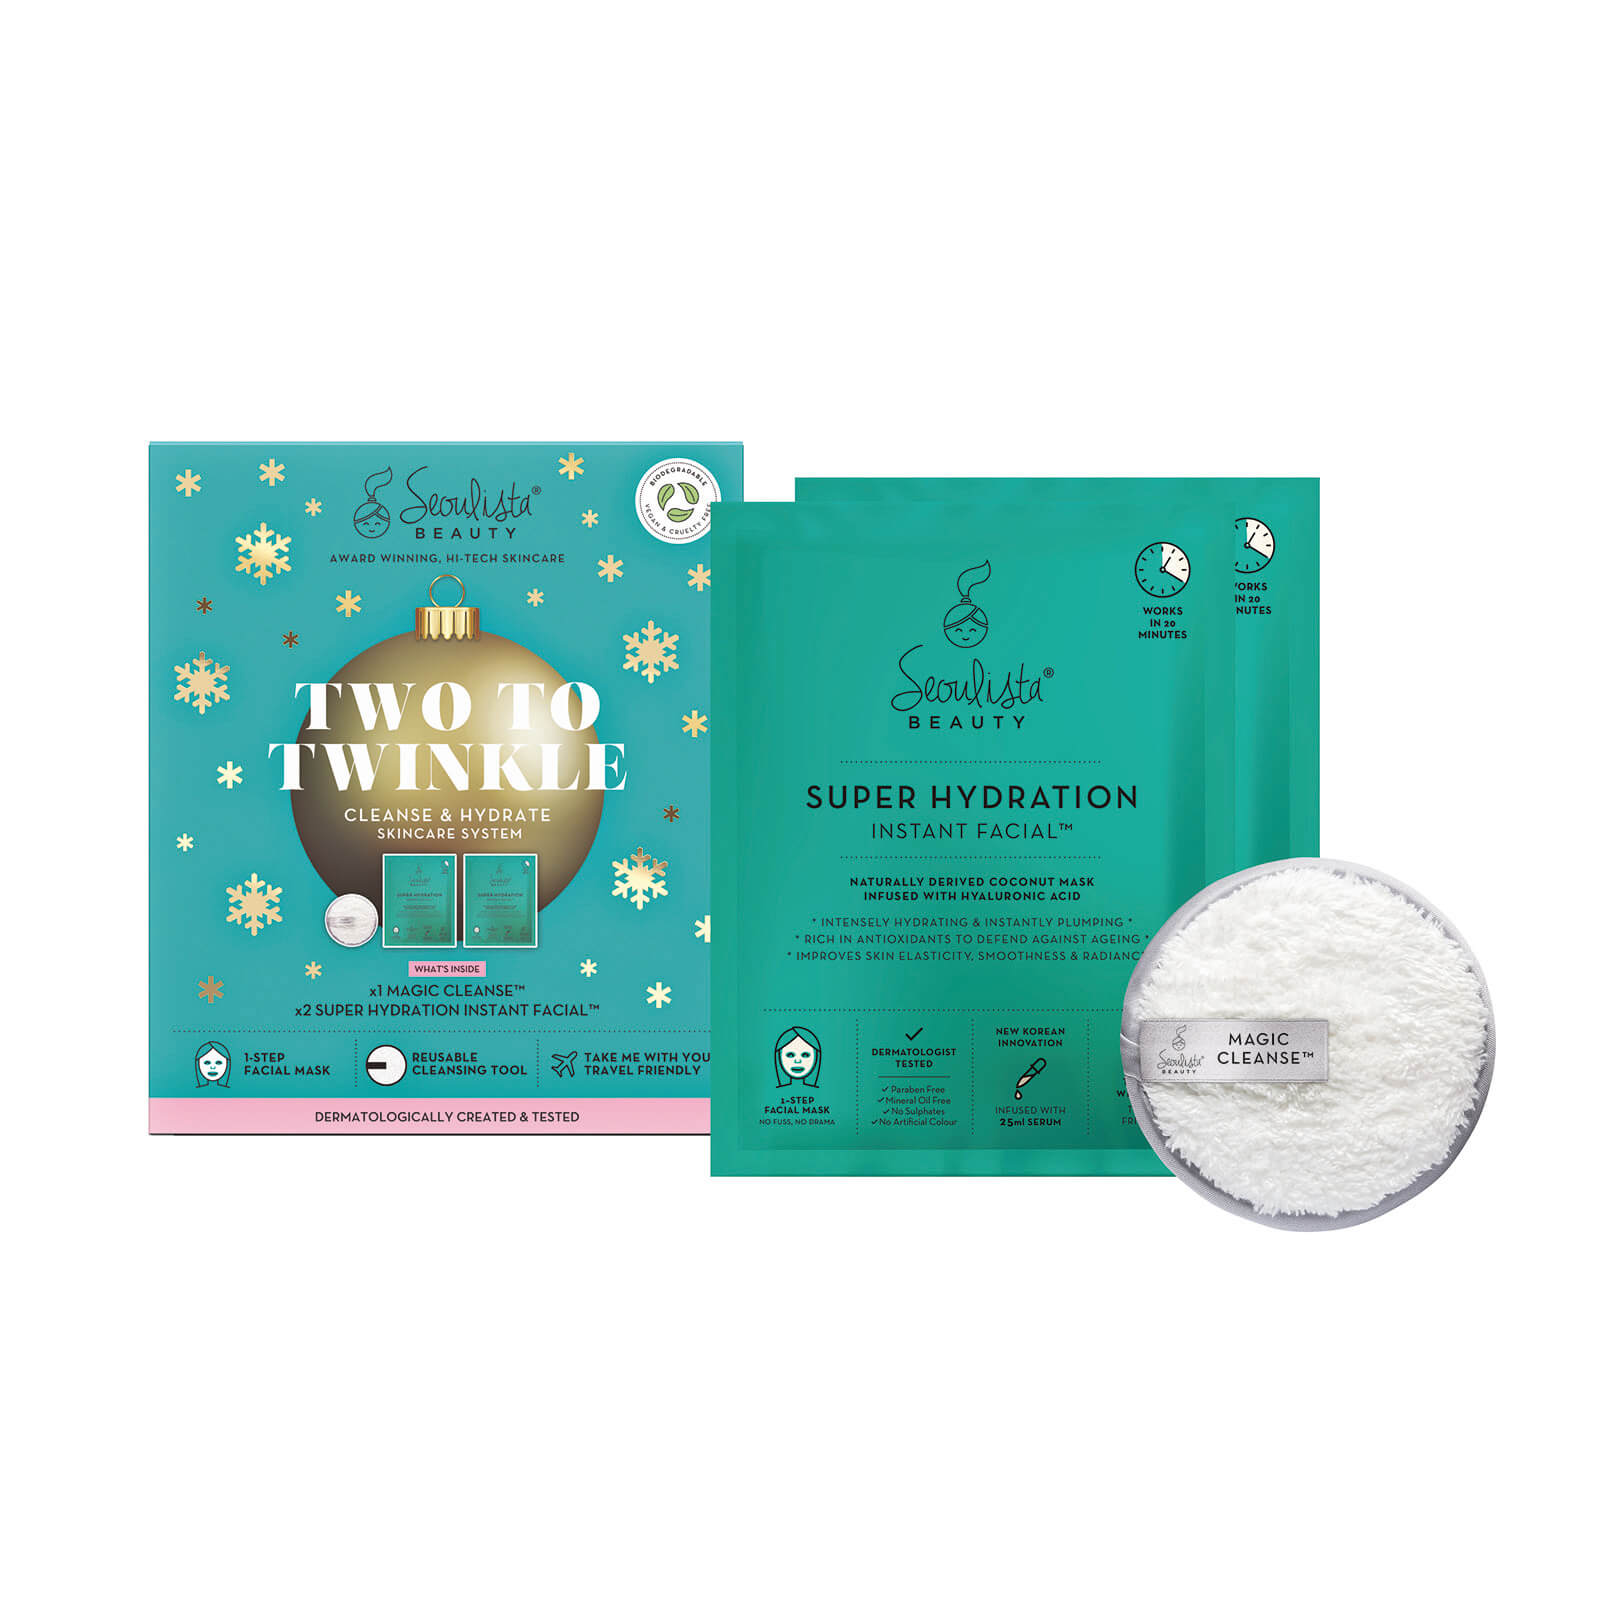 Seoulista Beauty Two to Twinkle Cleanse and Hydrate Christmas Pack